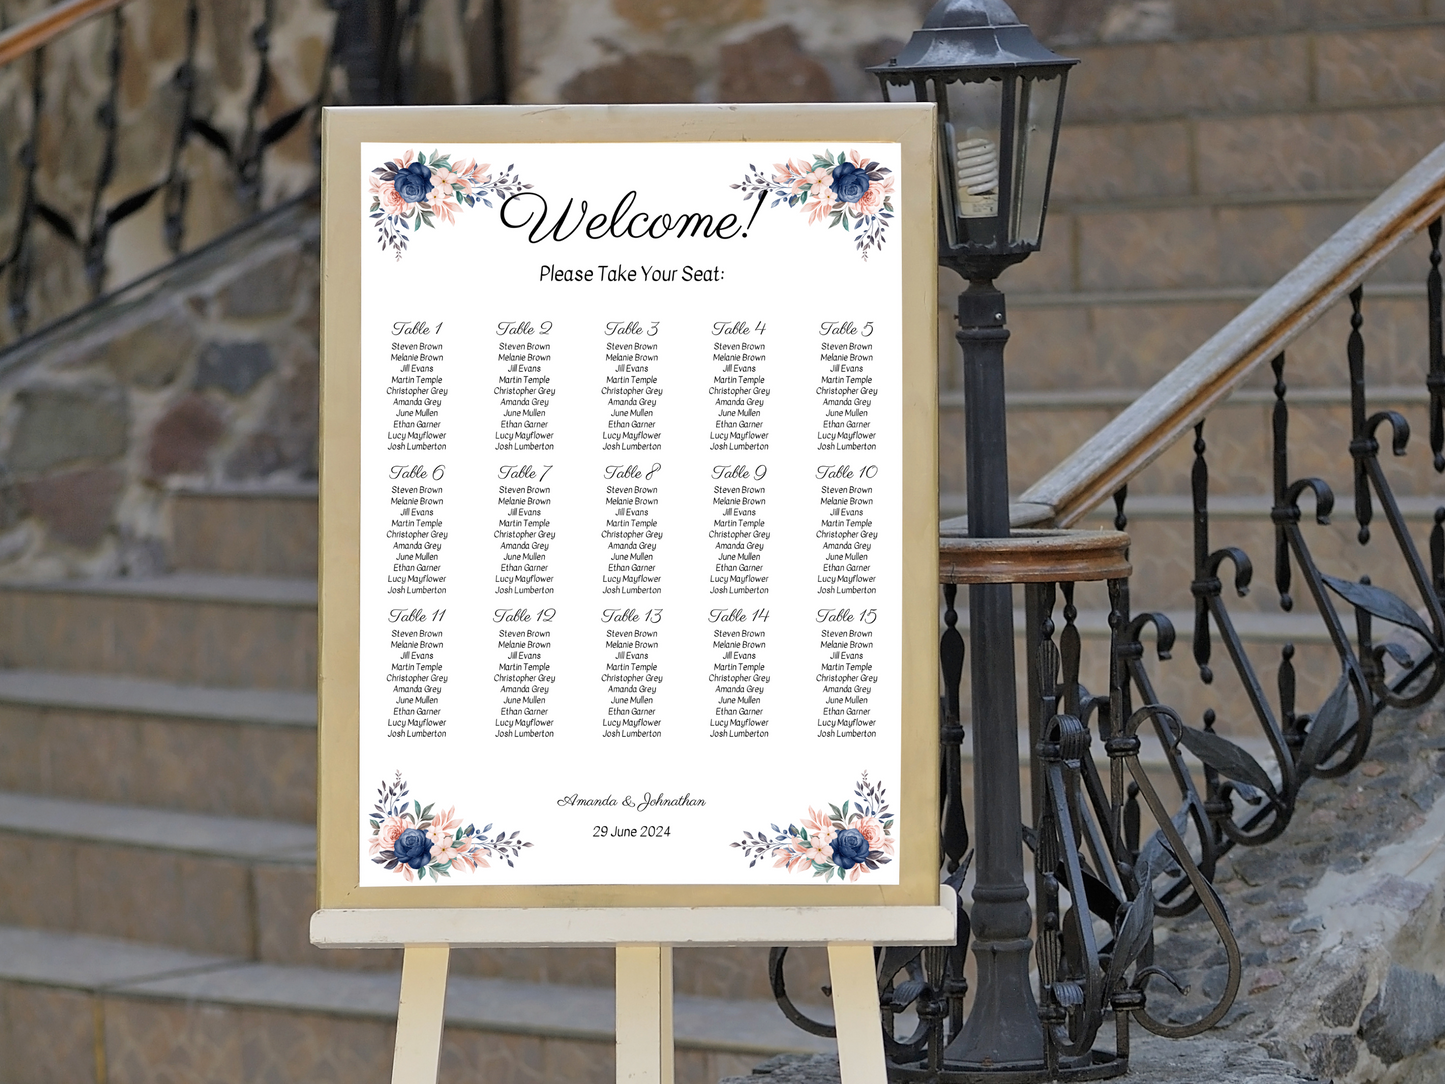 Pink & Blue Floral Wedding Seating Chart Templates, Printable Templates